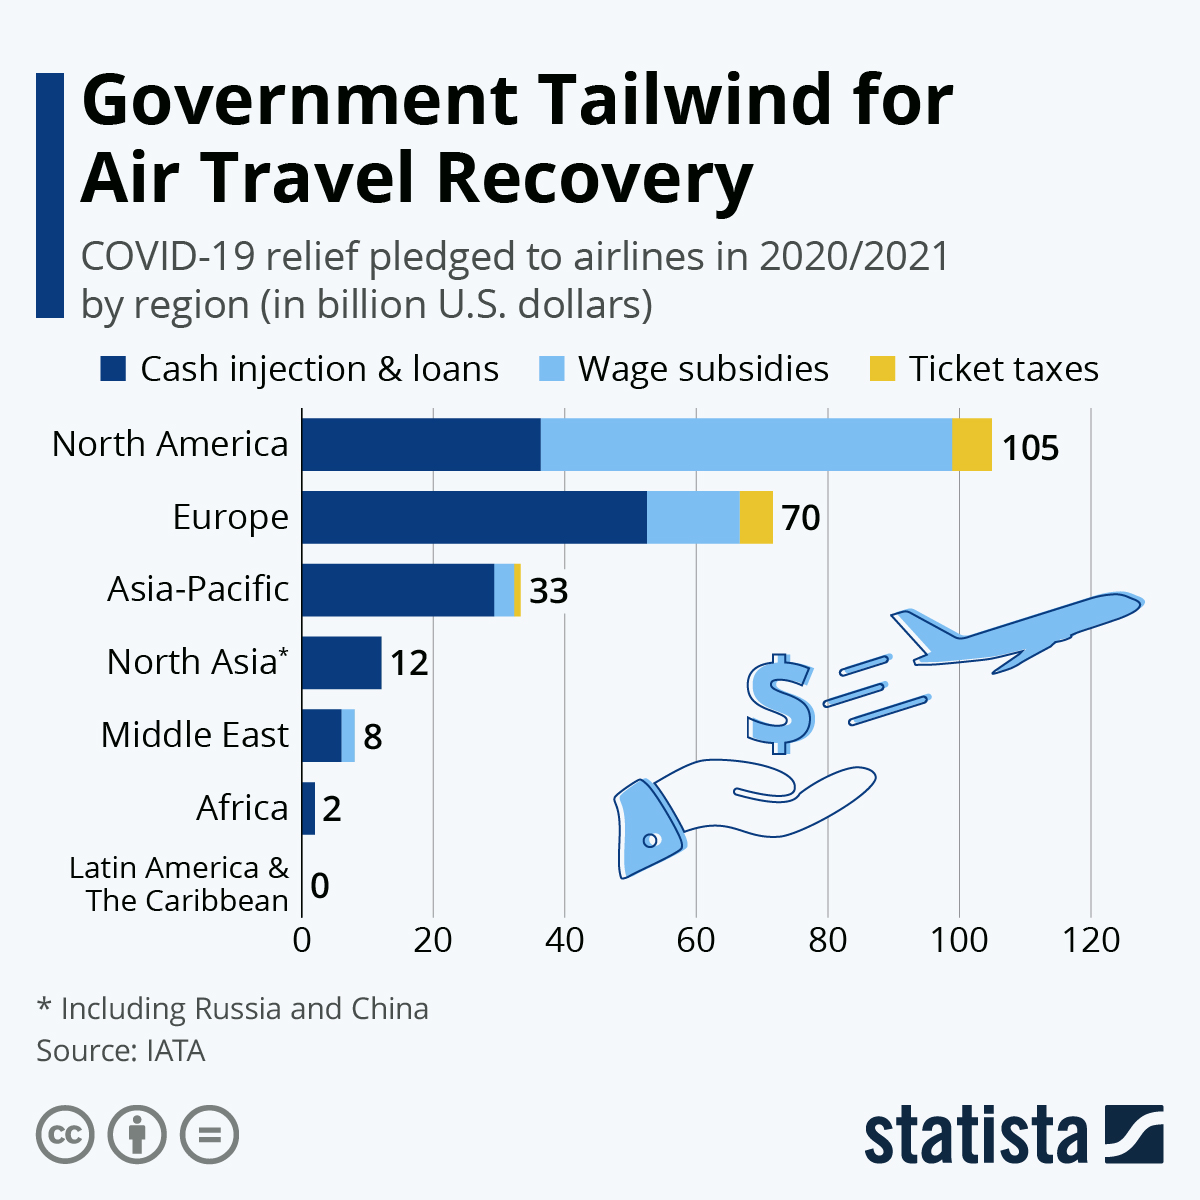 The Government Tailwind for Air Travel Recovery